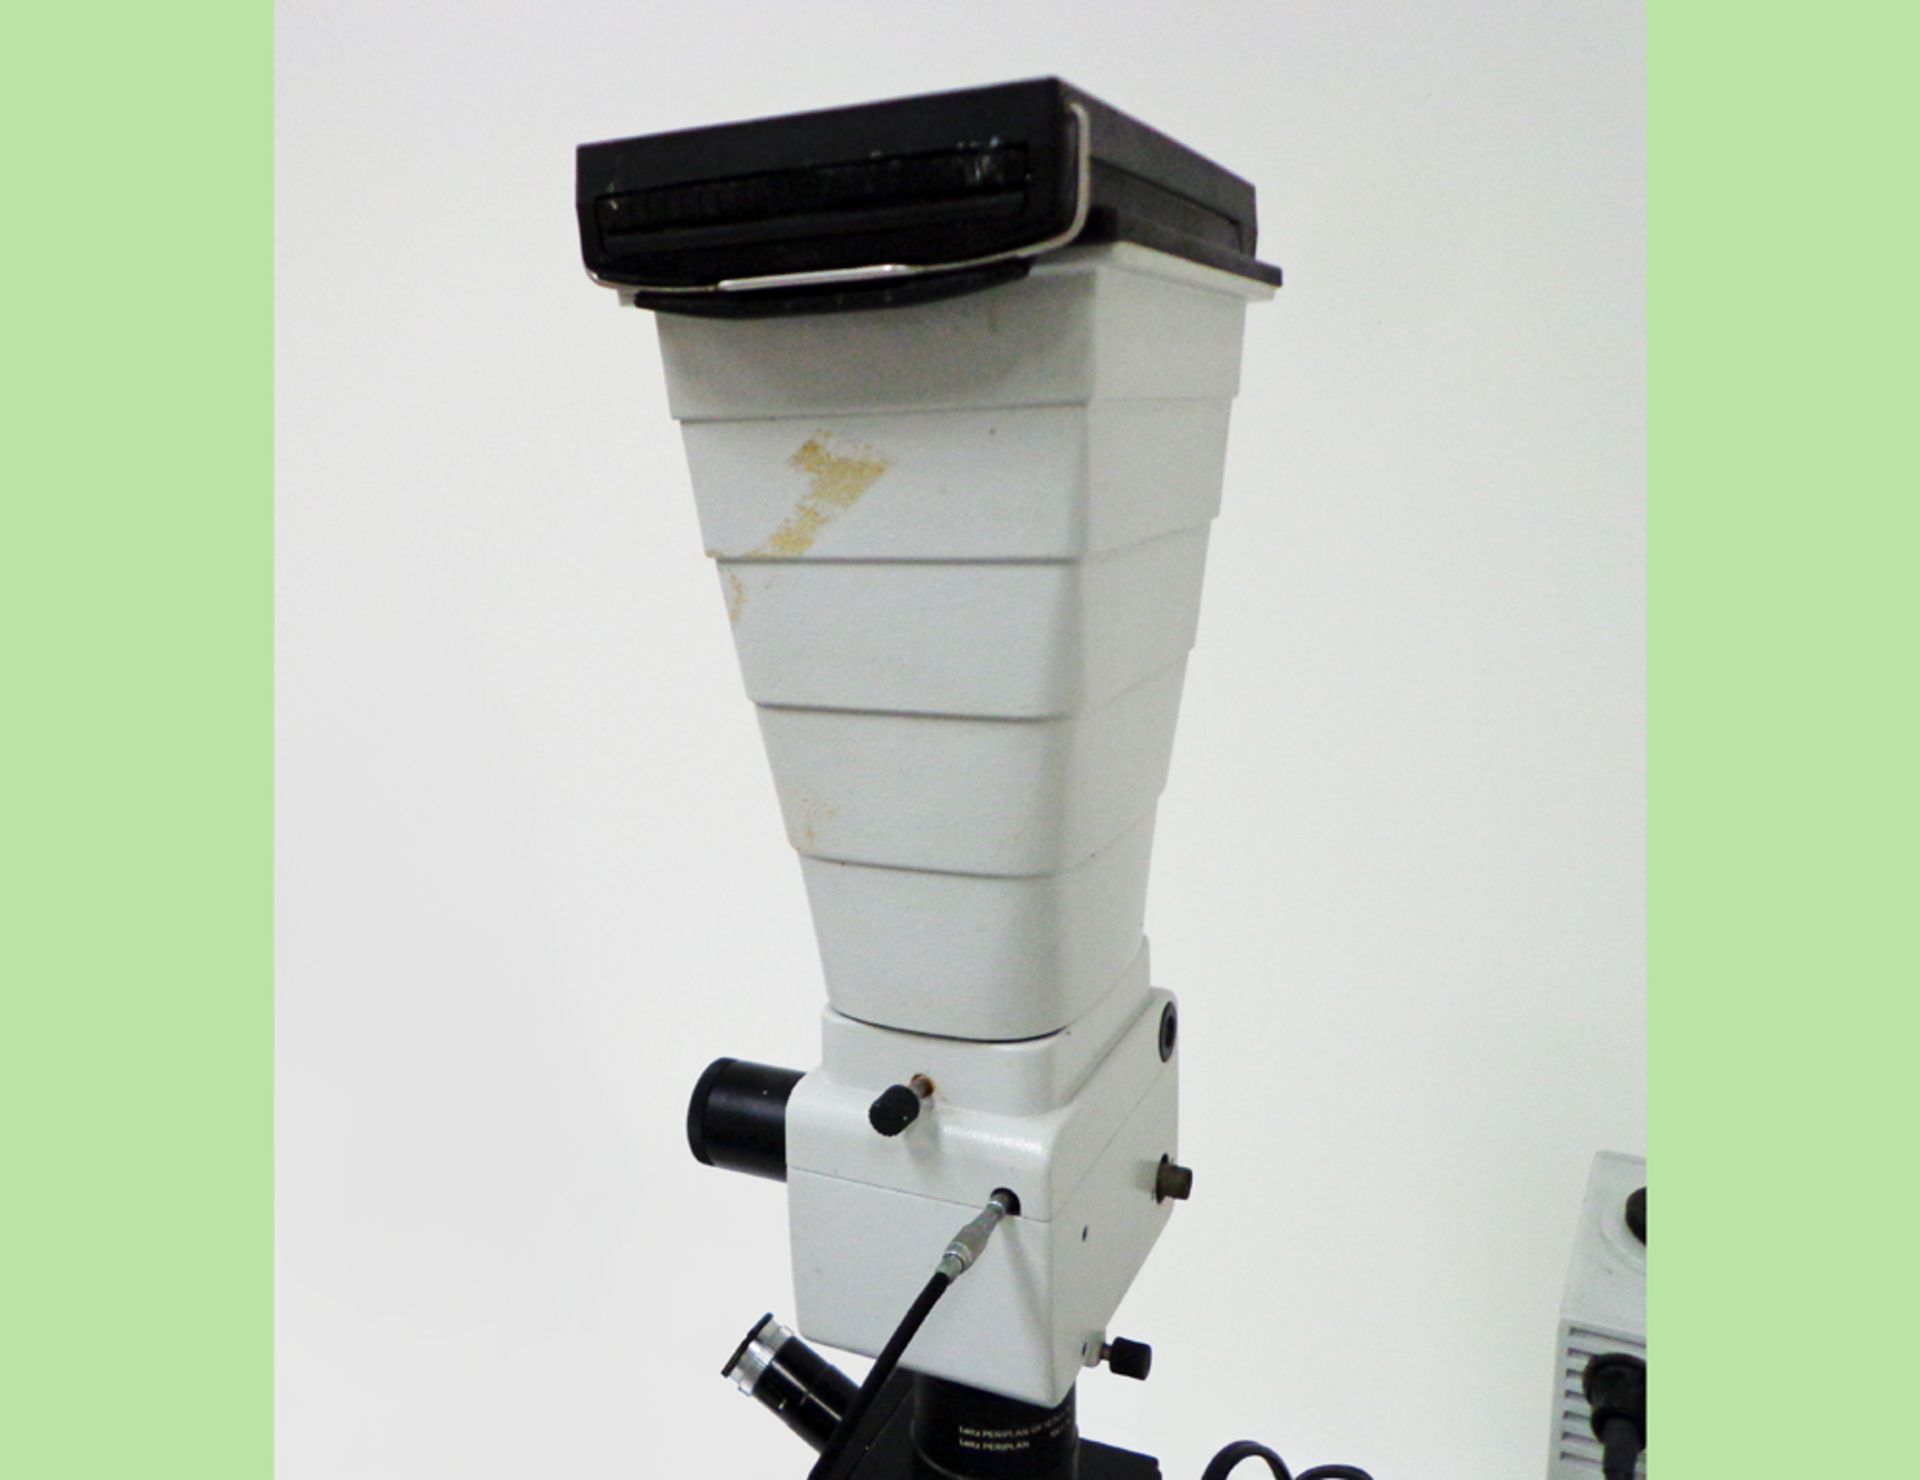 Leitz Diavert Phase Contrast Inverted Binocular Microscope with Wild (polaroid) MP511 Camera with - Image 15 of 17